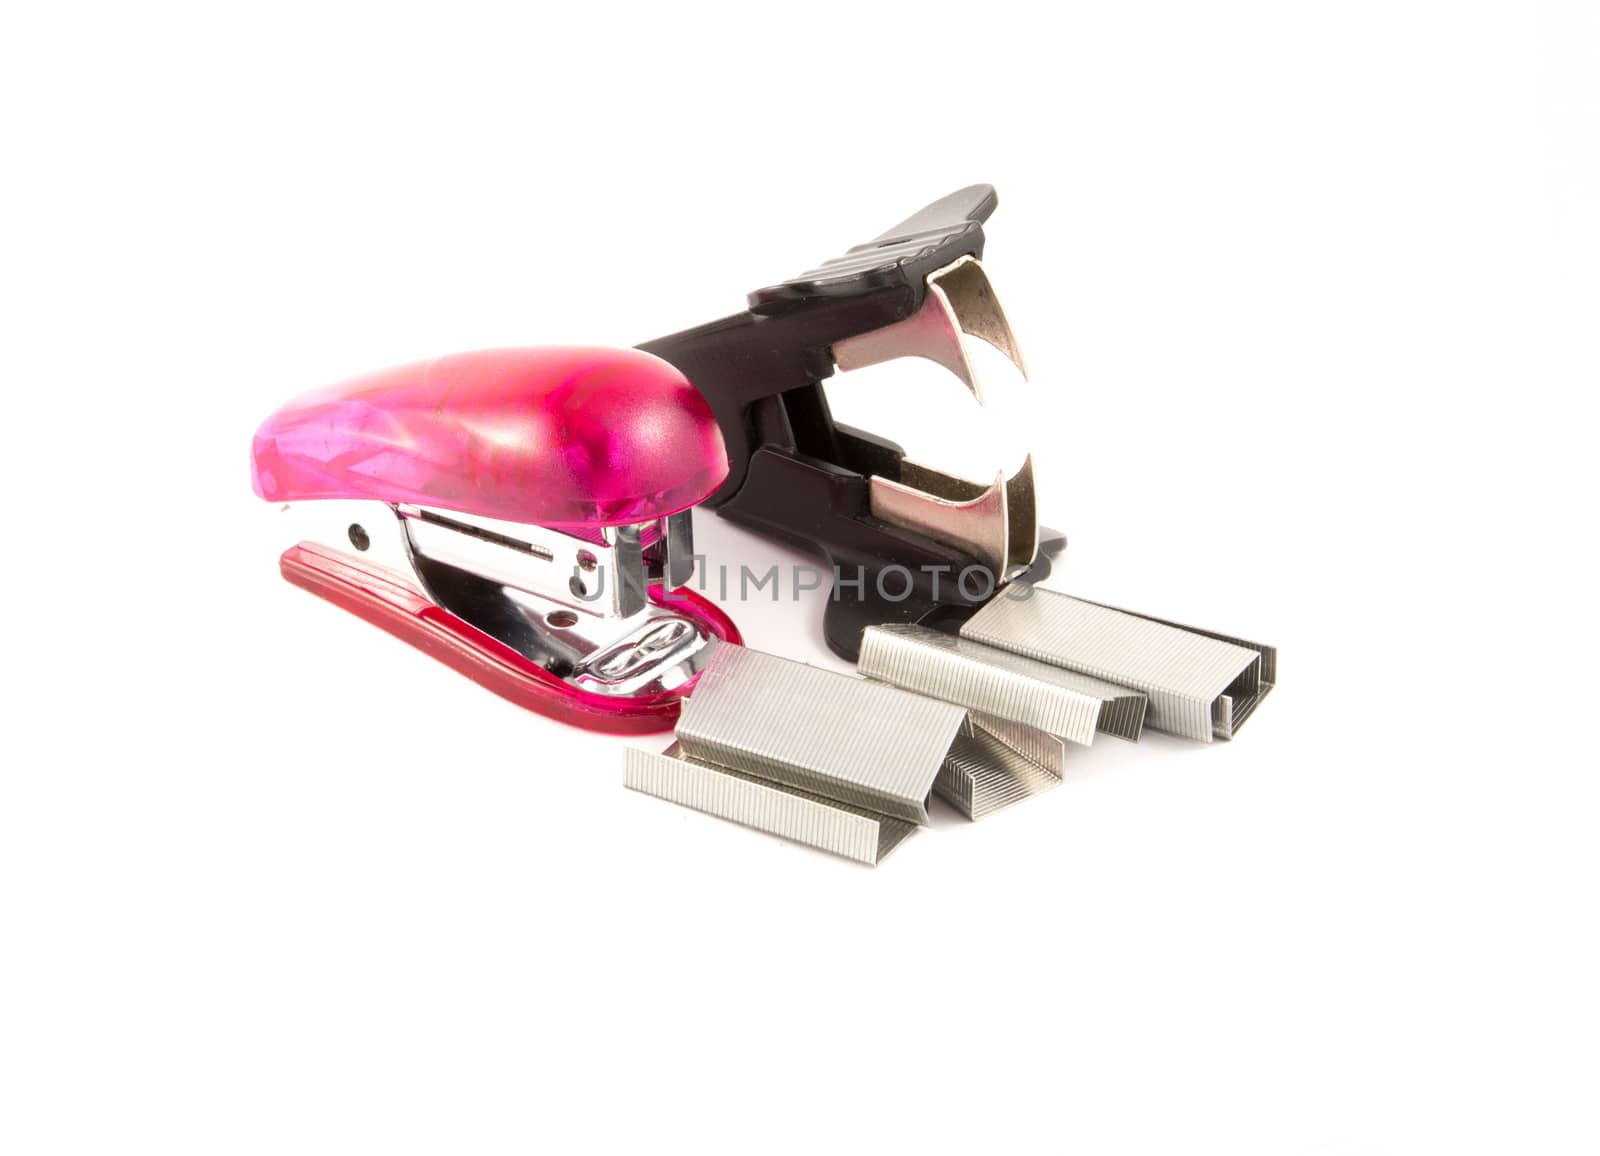 stapler and staple remover isolated on white background with staples